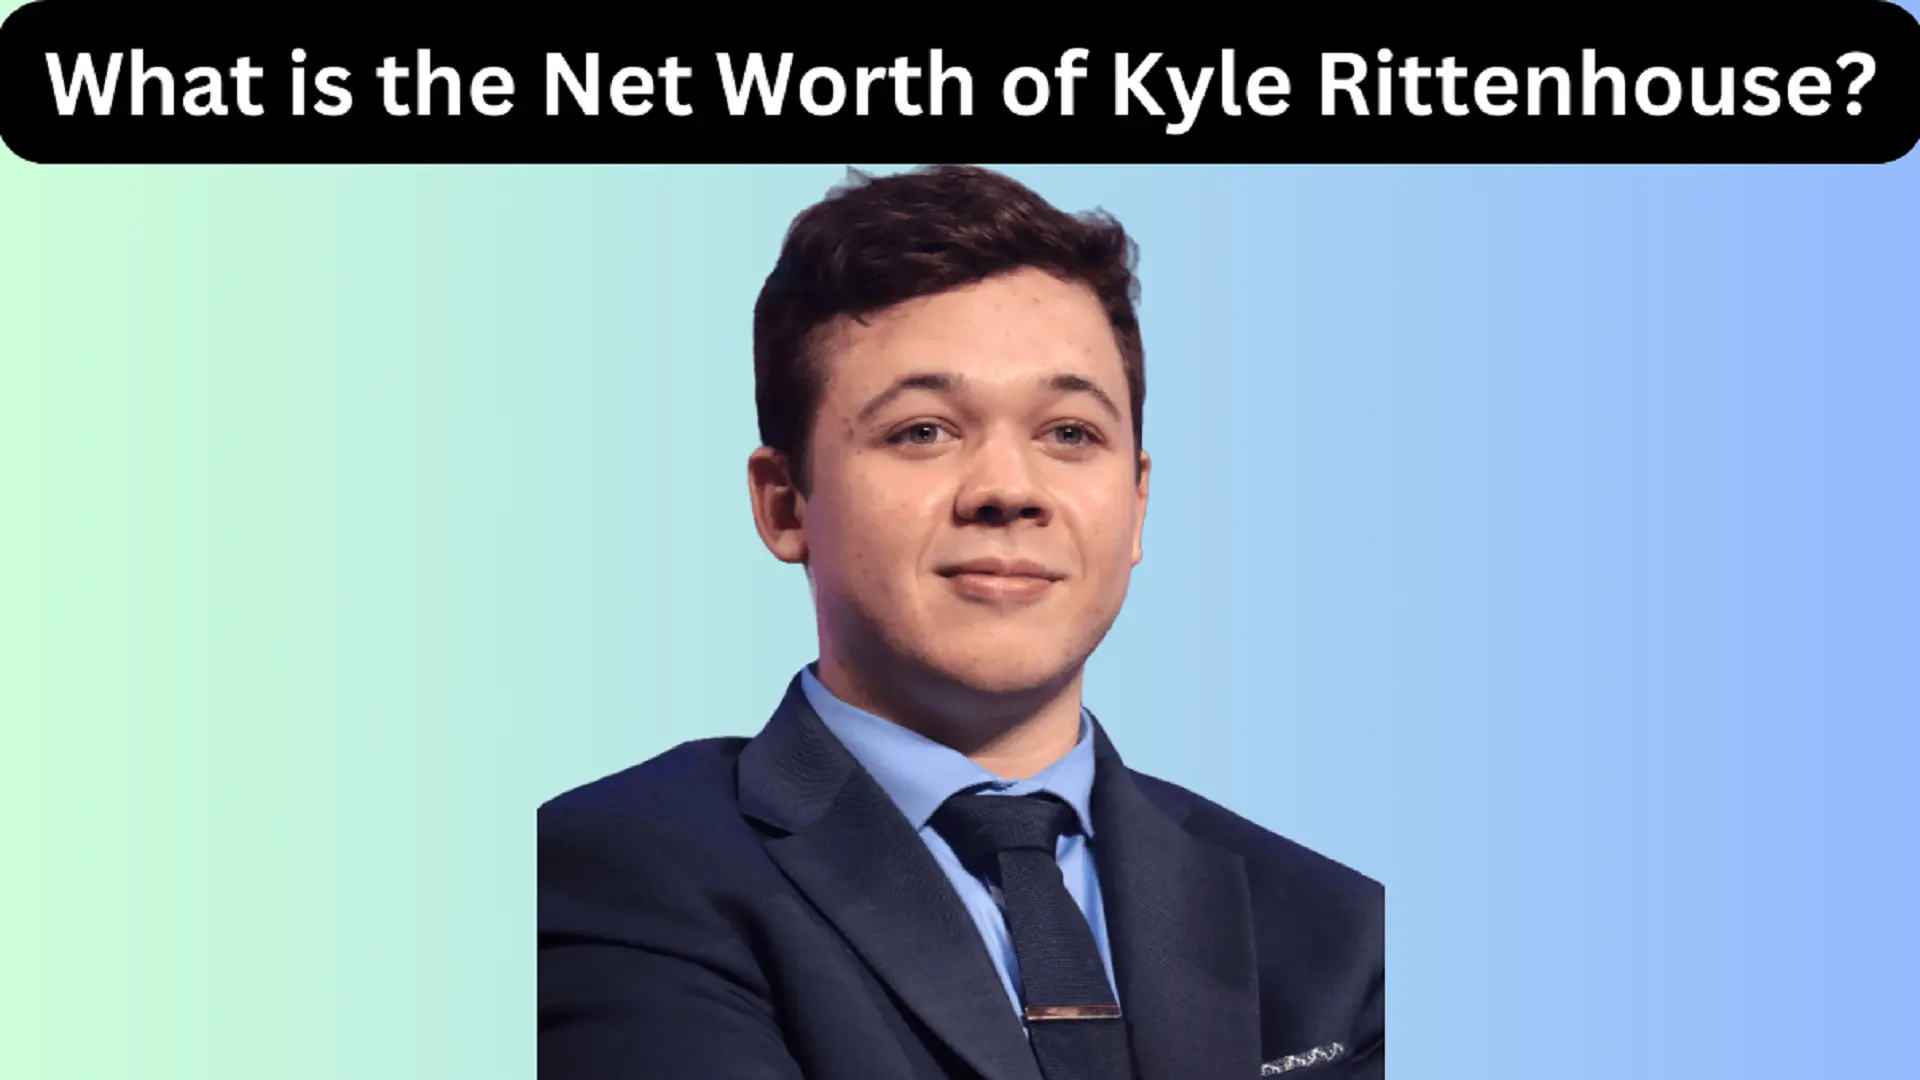 What is the Net Worth of Kyle Rittenhouse